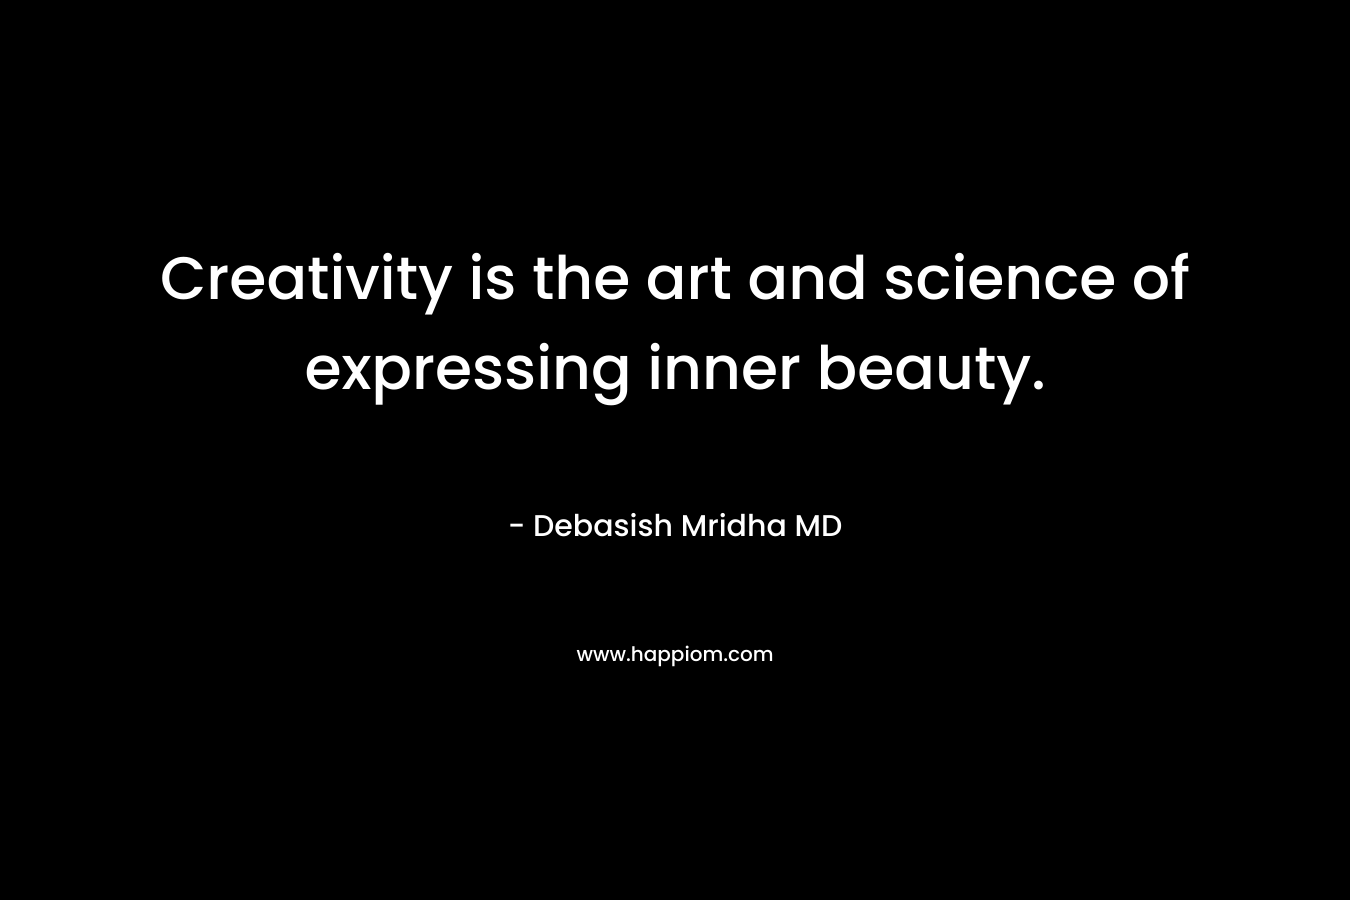 Creativity is the art and science of expressing inner beauty.